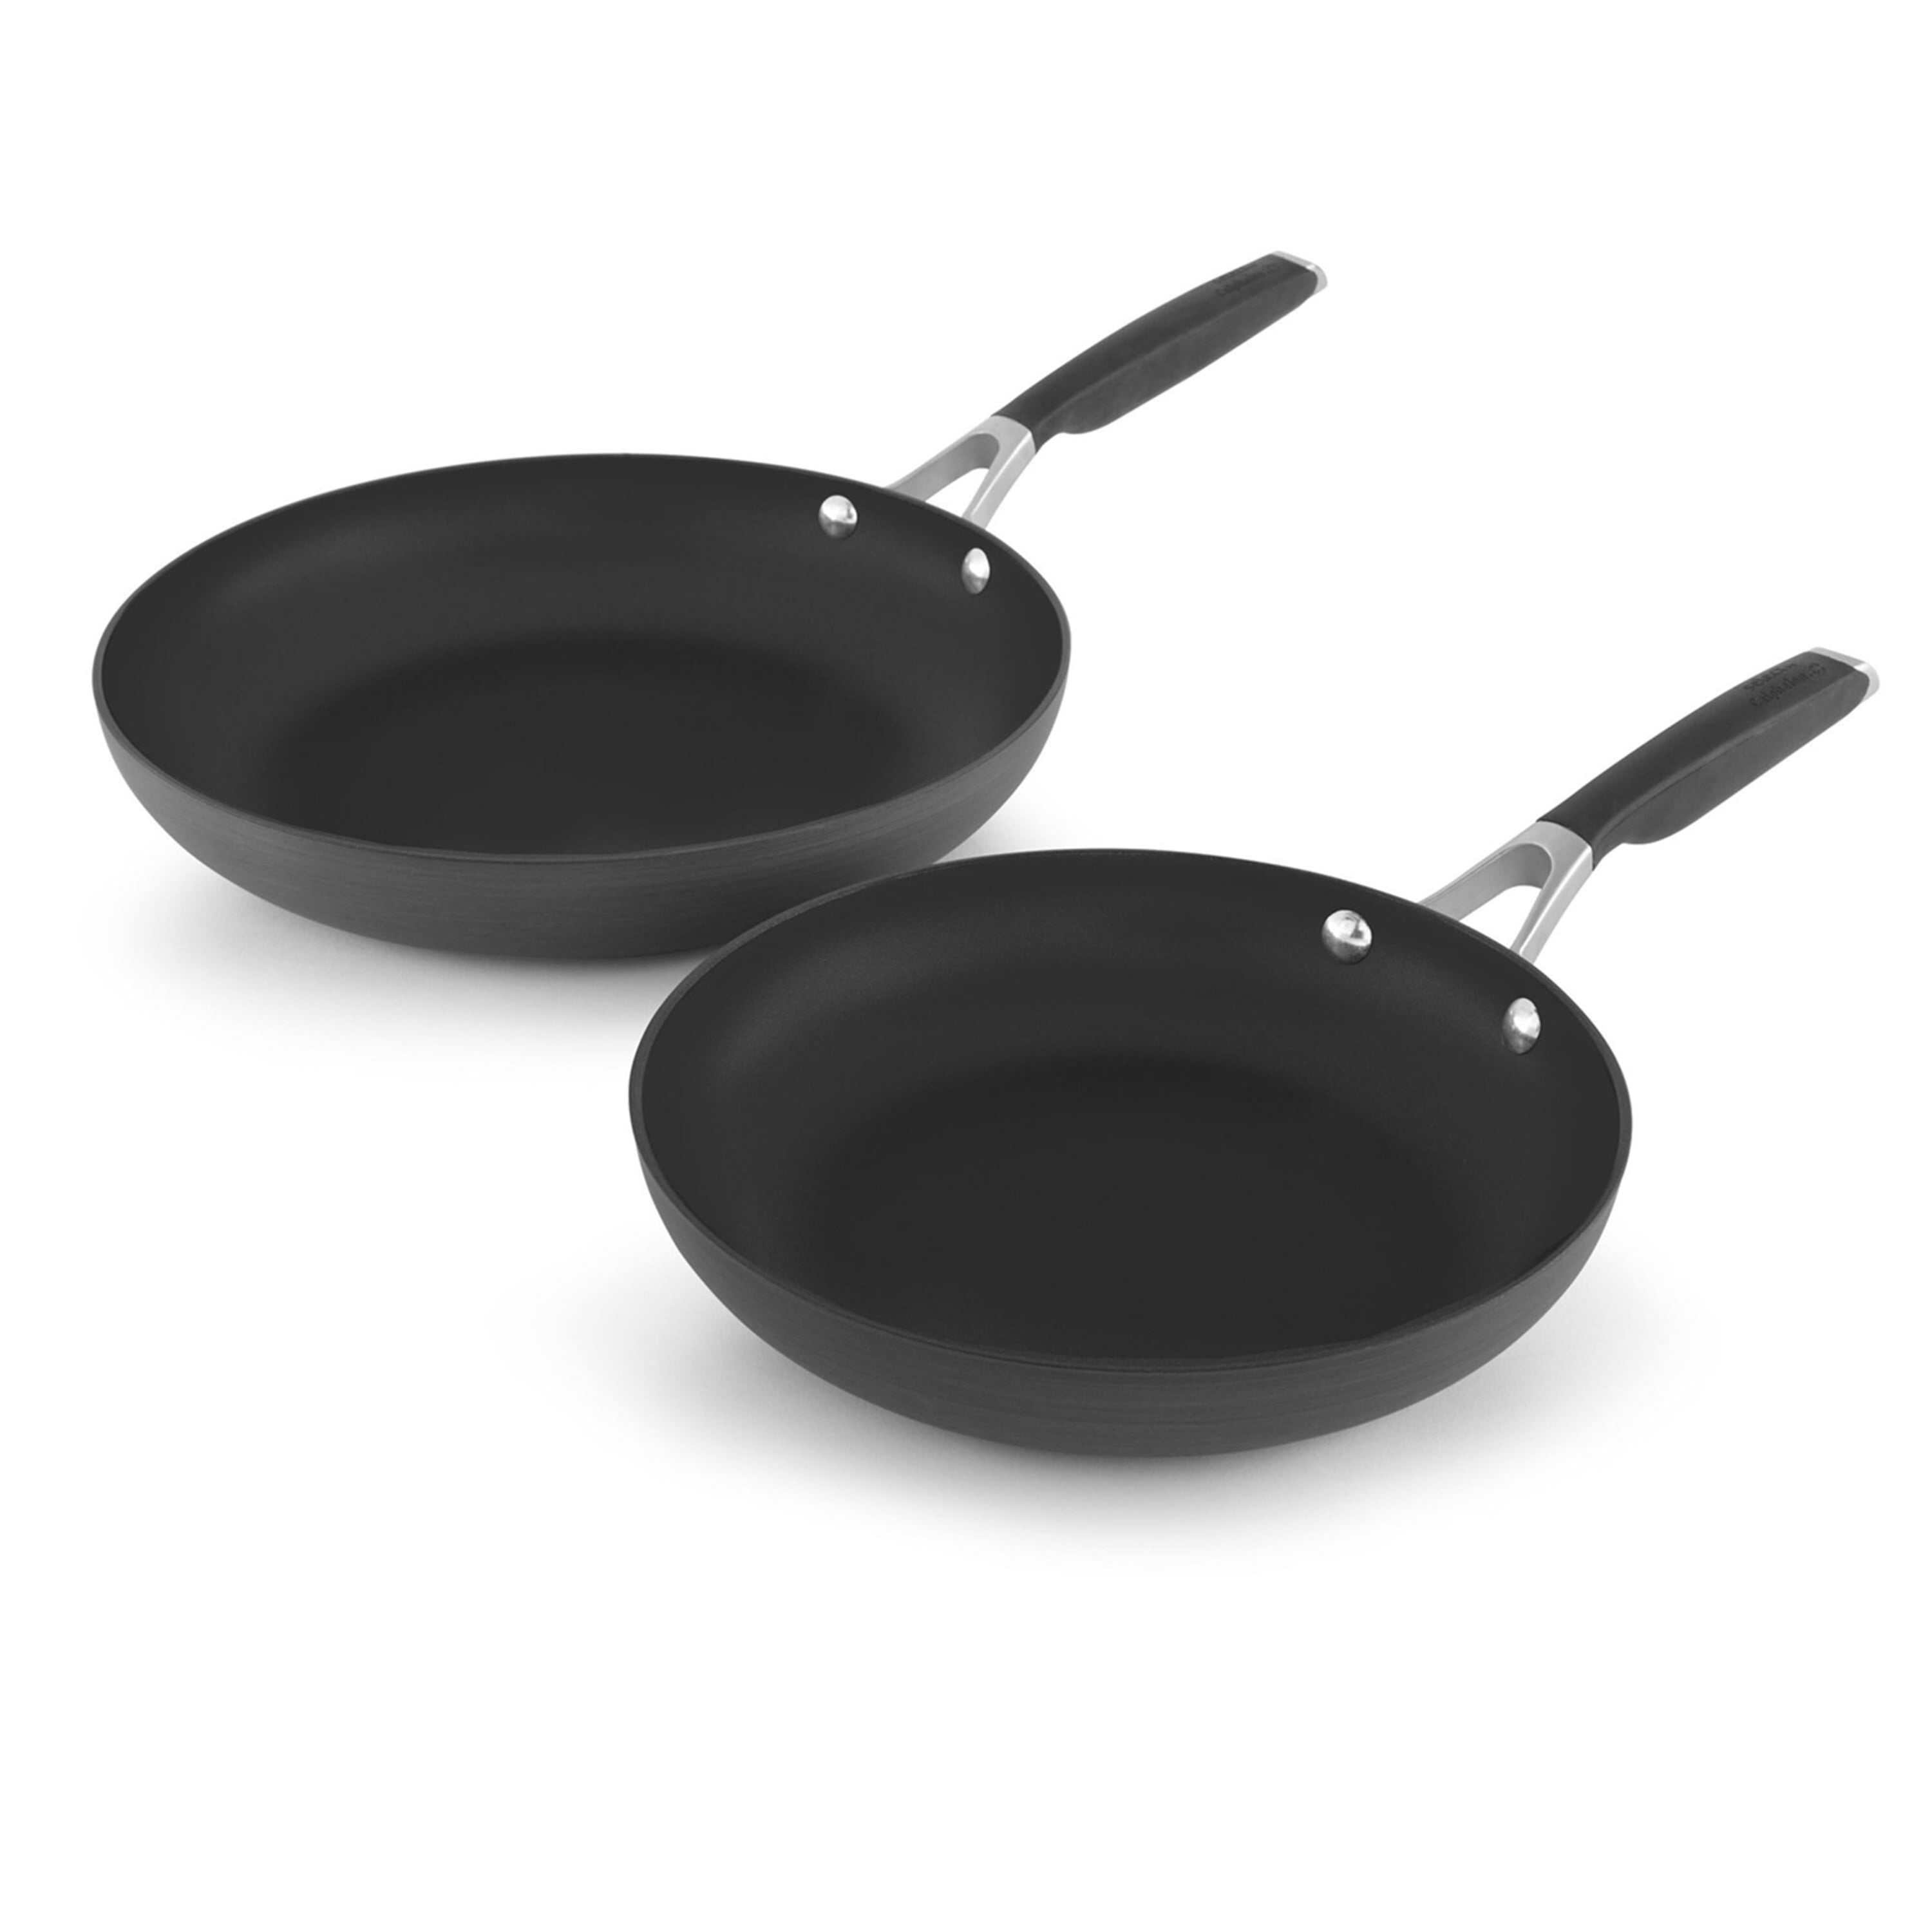 Select by Calphalon AquaShield Nonstick 12-Inch Frying Pan with Lid